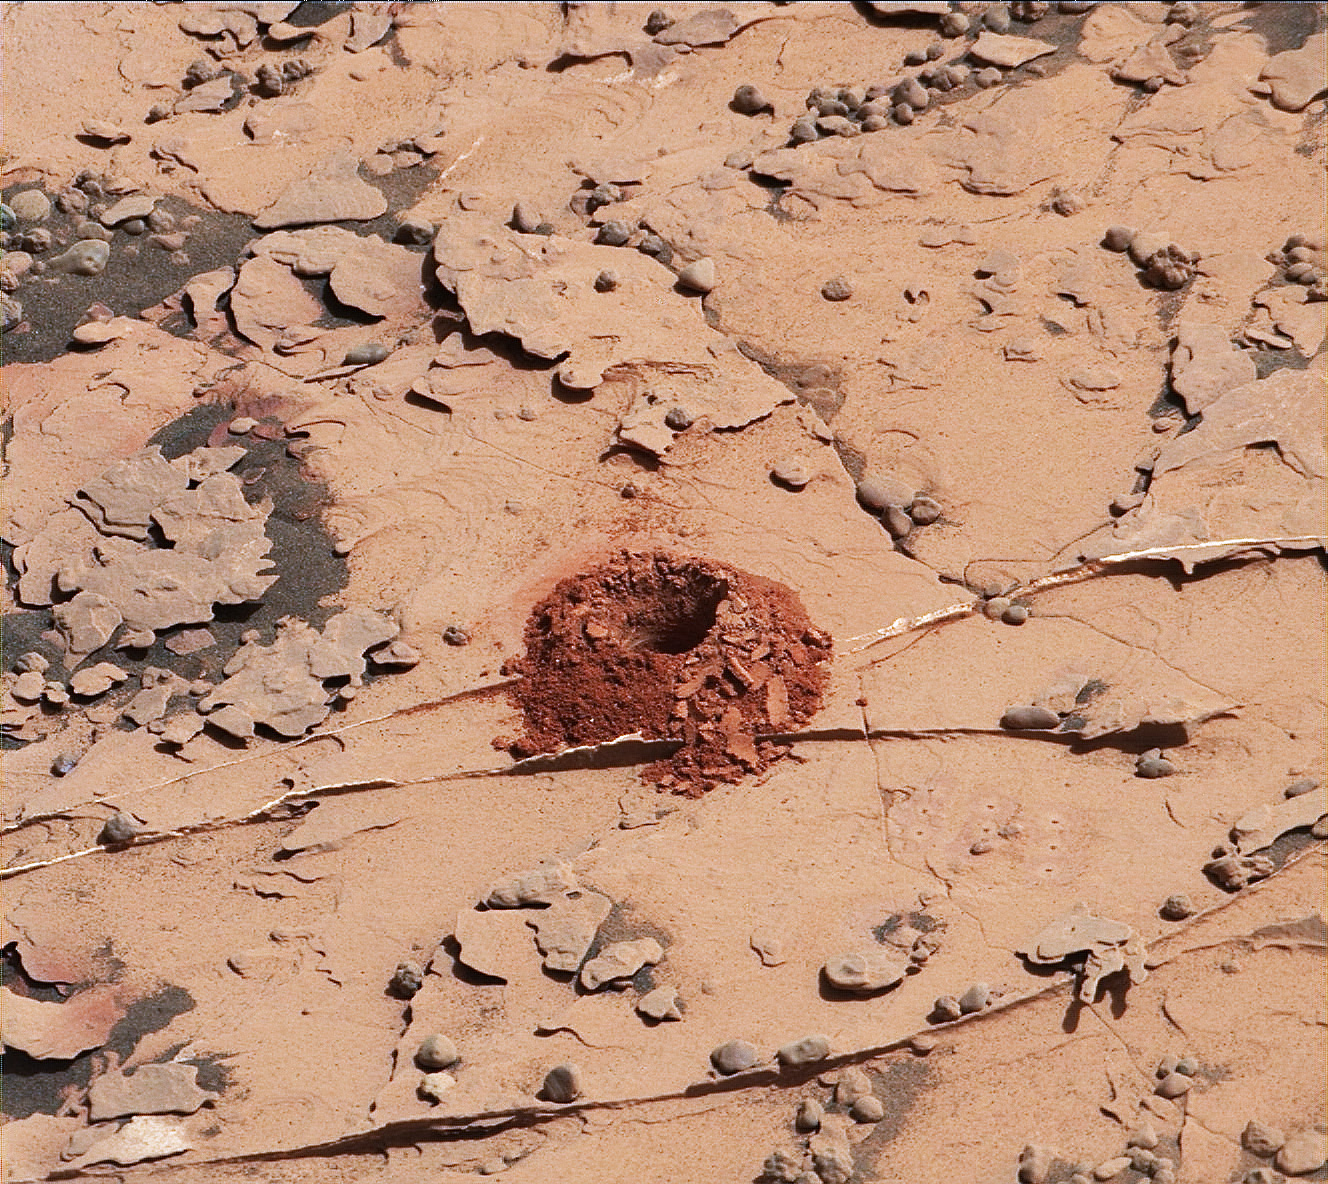 A close-up image of a 2-inch-deep hole produced using a new drilling technique for NASA's Curiosity rover. The hole is about 0.6 inches across (1.6 centimeters). This image was taken by Curiosity's Mast Camera (Mastcam) on Sol 2057. It has been white balanced and contrast enhanced.